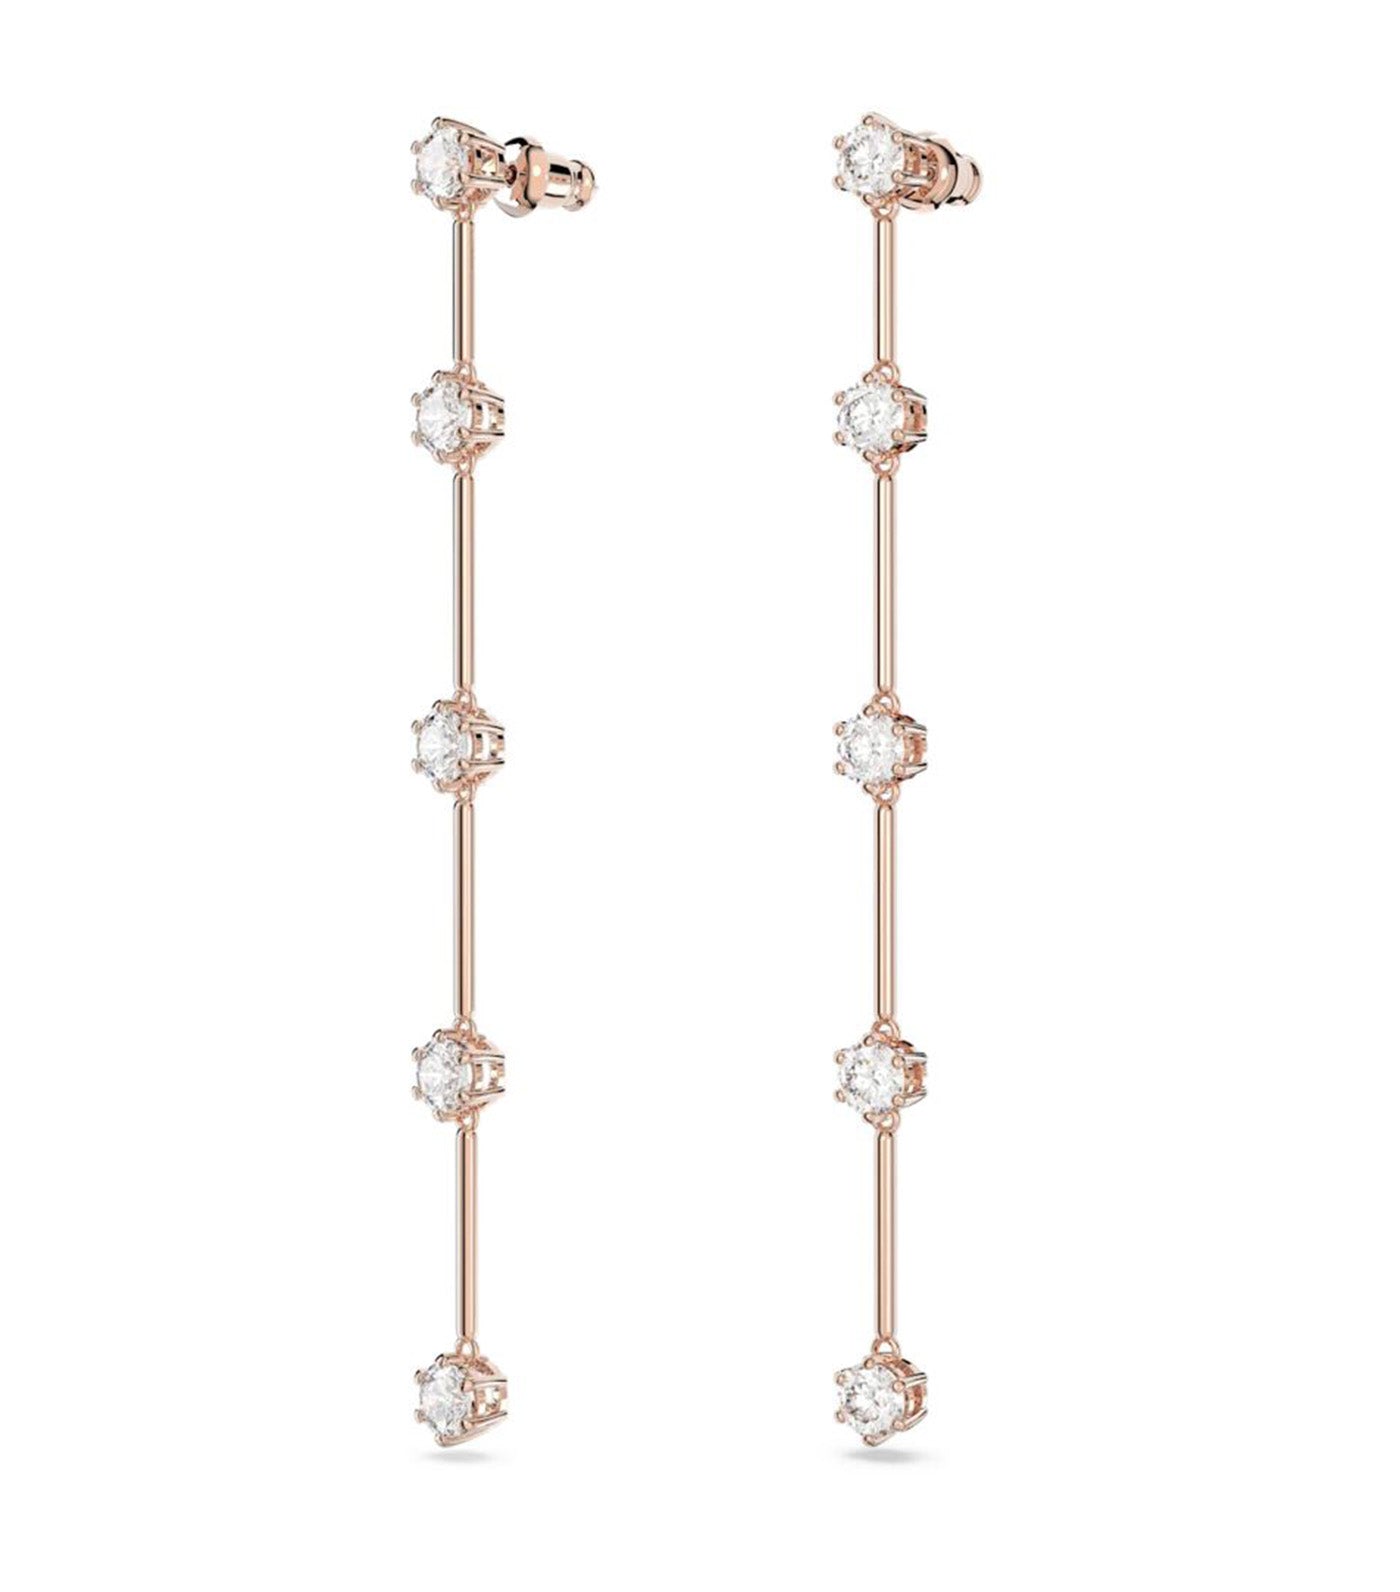 Constella Drop Earrings, Round Cut, White, Rose Gold-Tone Plated Pink